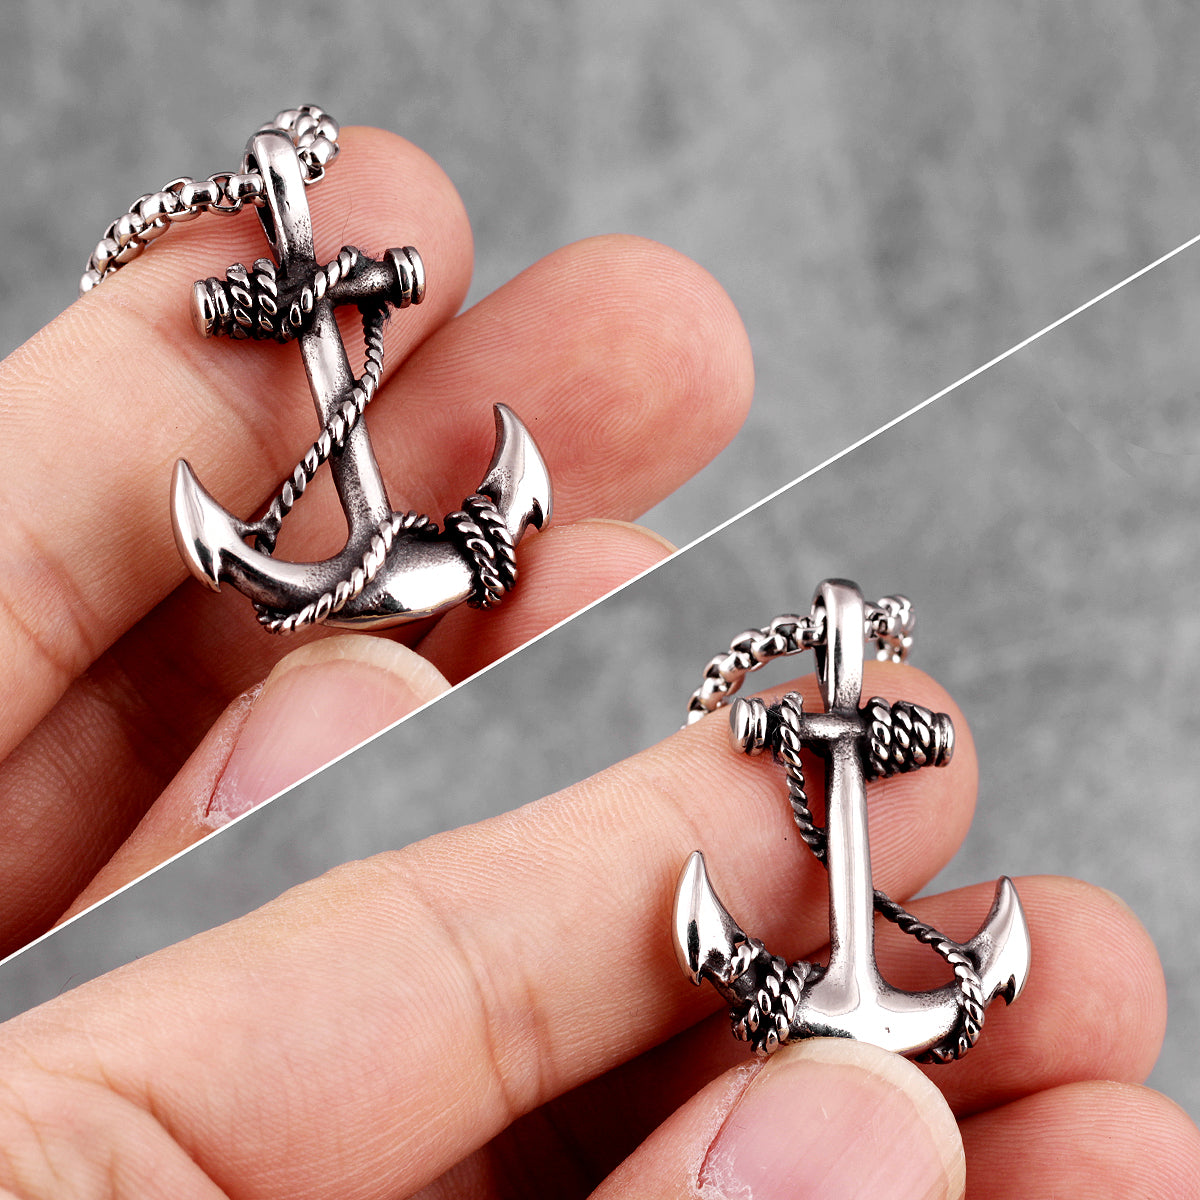 Stainless Steel Sea Anchor Sailor Man Men Necklaces